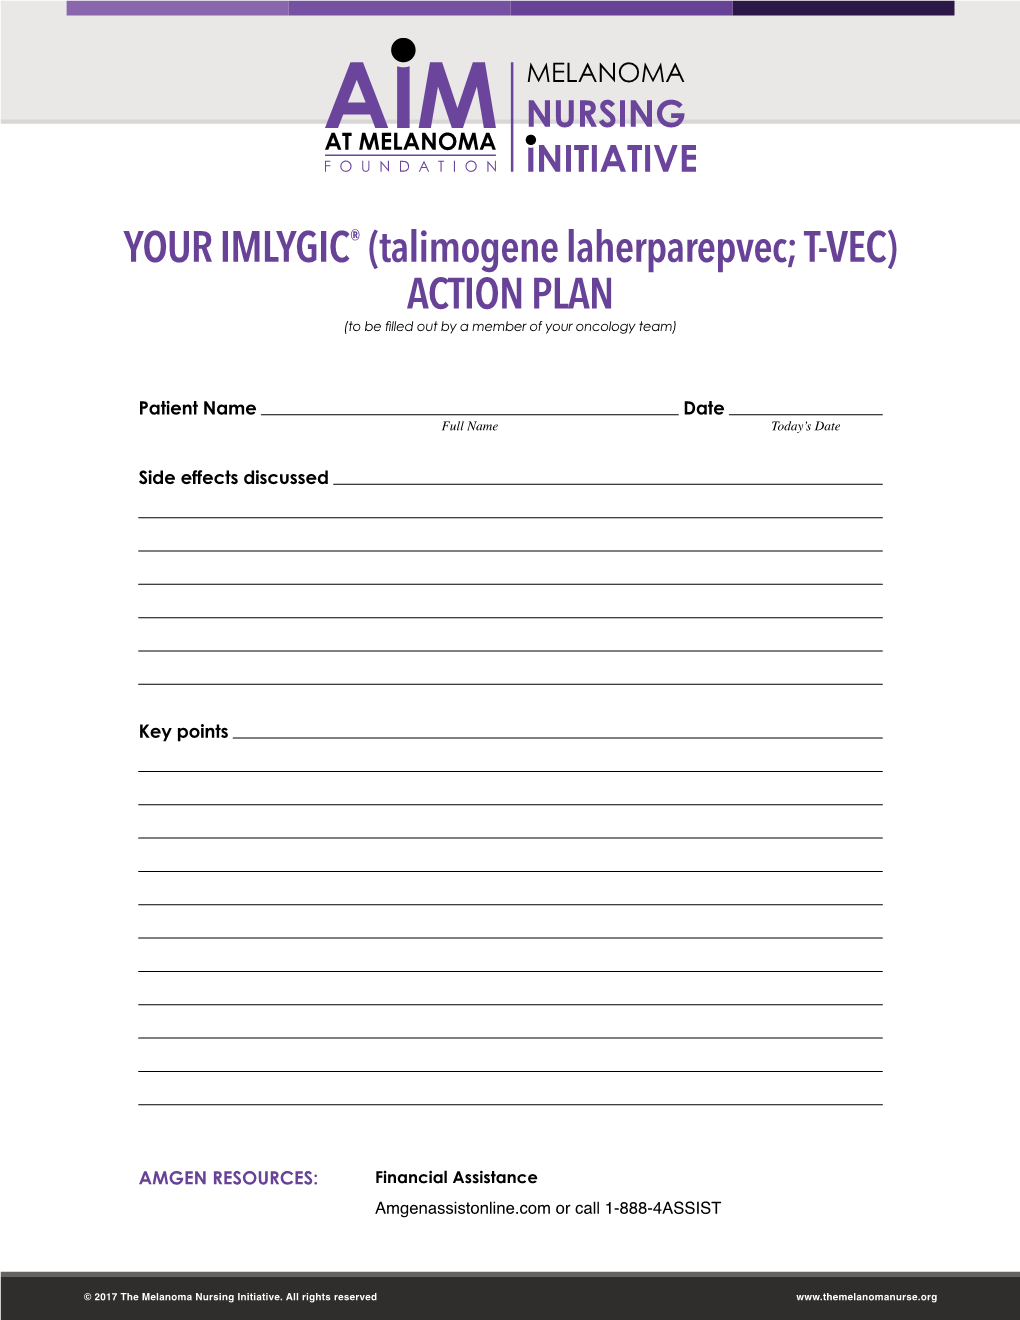 YOUR IMLYGIC® (Talimogene Laherparepvec; T-VEC) ACTION PLAN (To Be Filled out by a Member of Your Oncology Team)